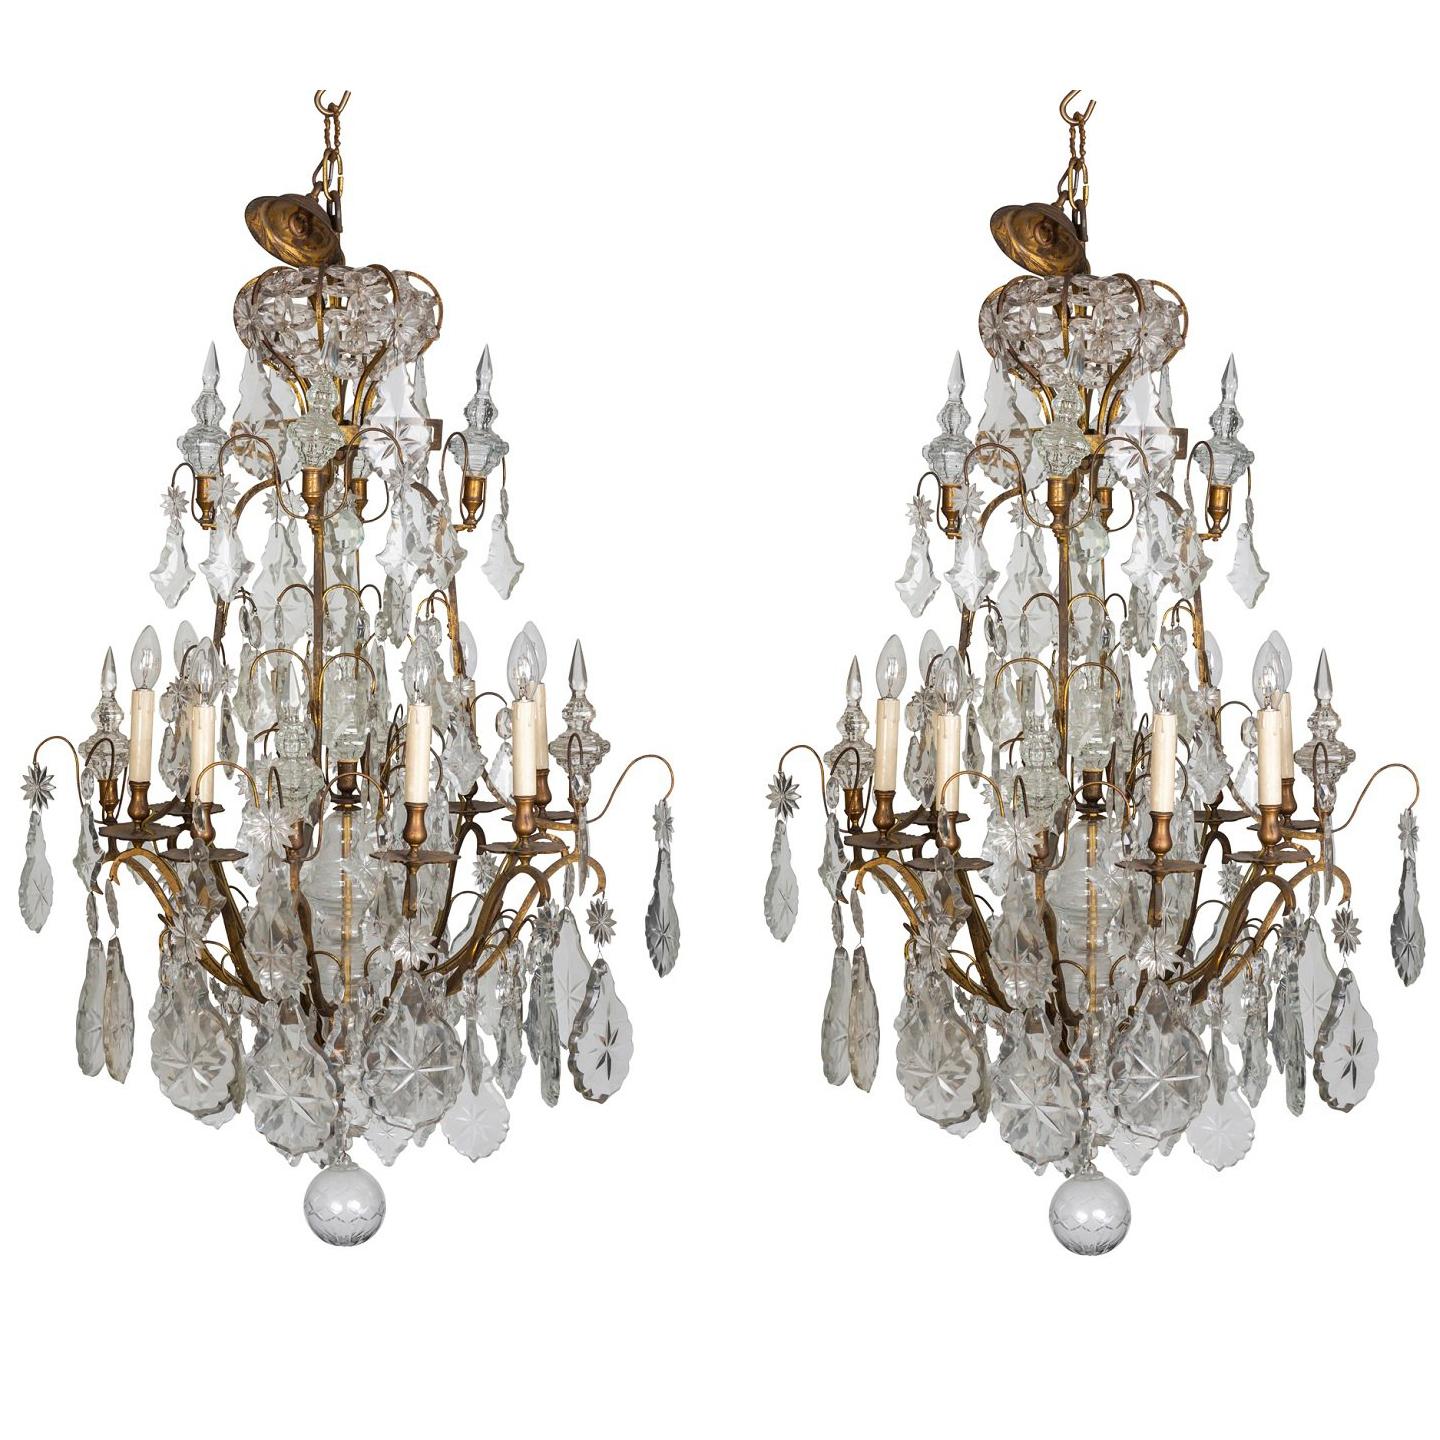 A Pair of Early 19th Century French Louis XV Style Crystal & Ormolu Chandeliers For Sale